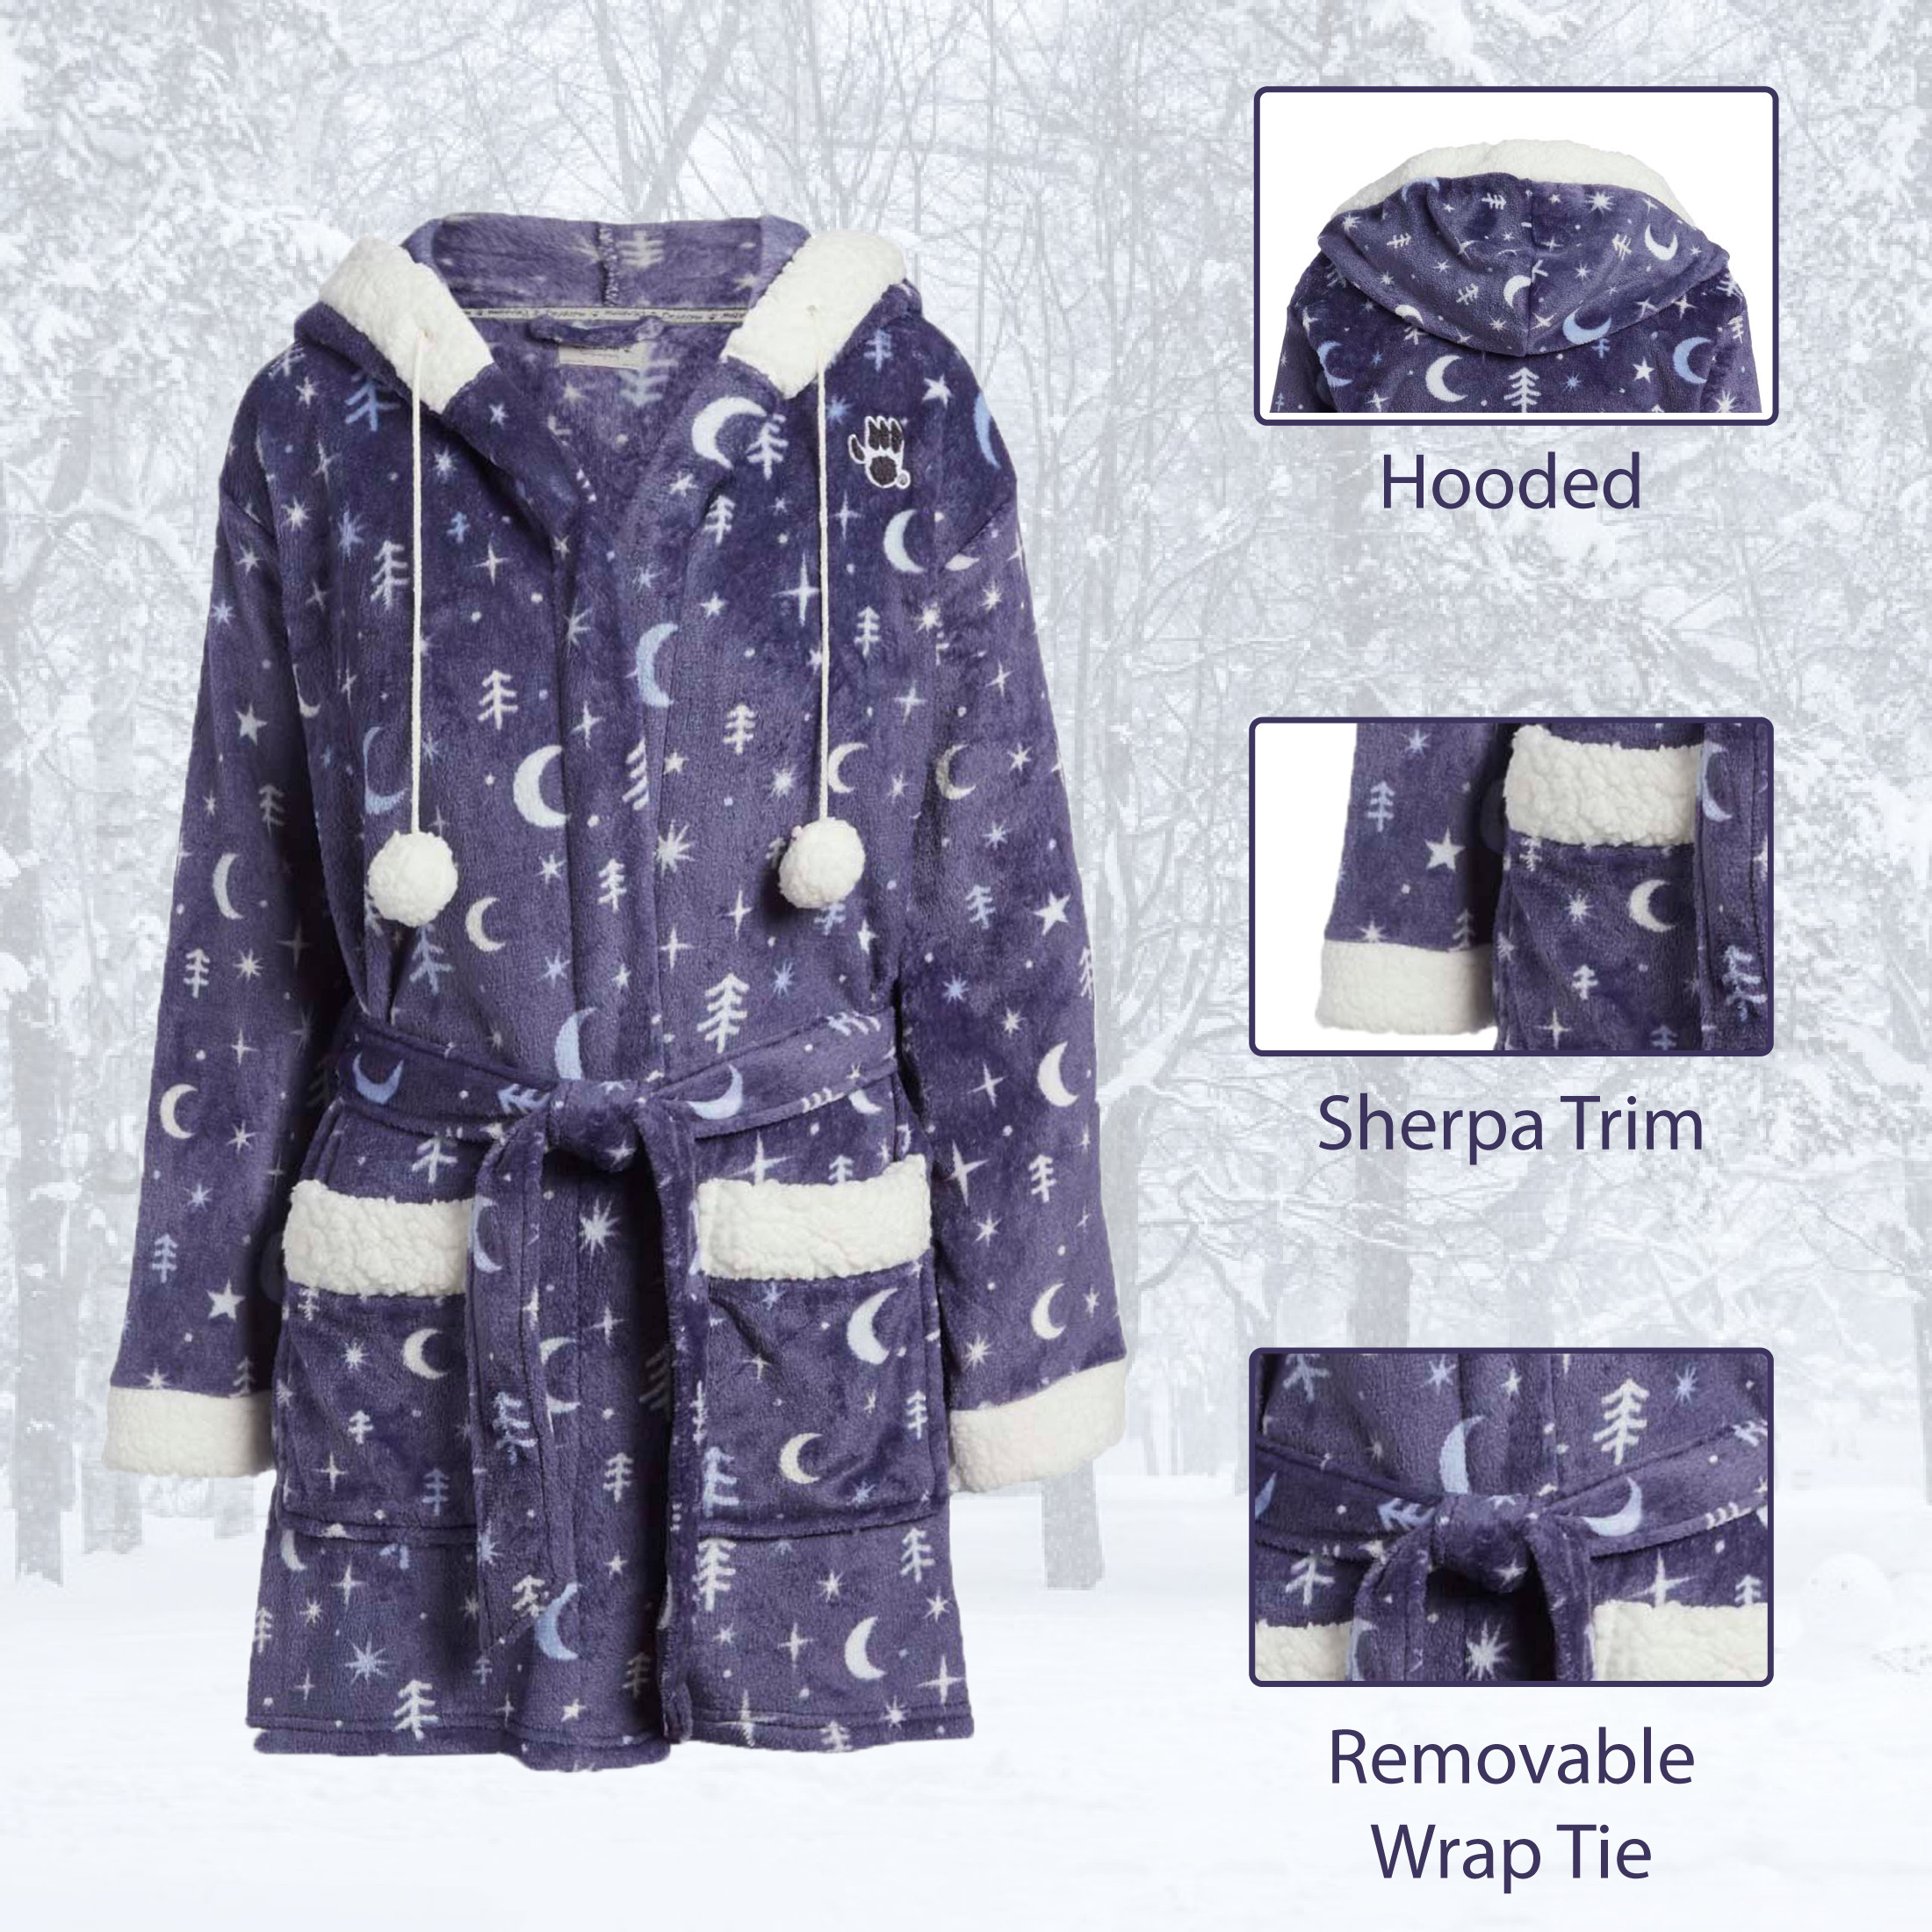 2-Pack: Women's Soft Plush Sherpa Lined Trim Print Robe With Pockets And Hood - Medium